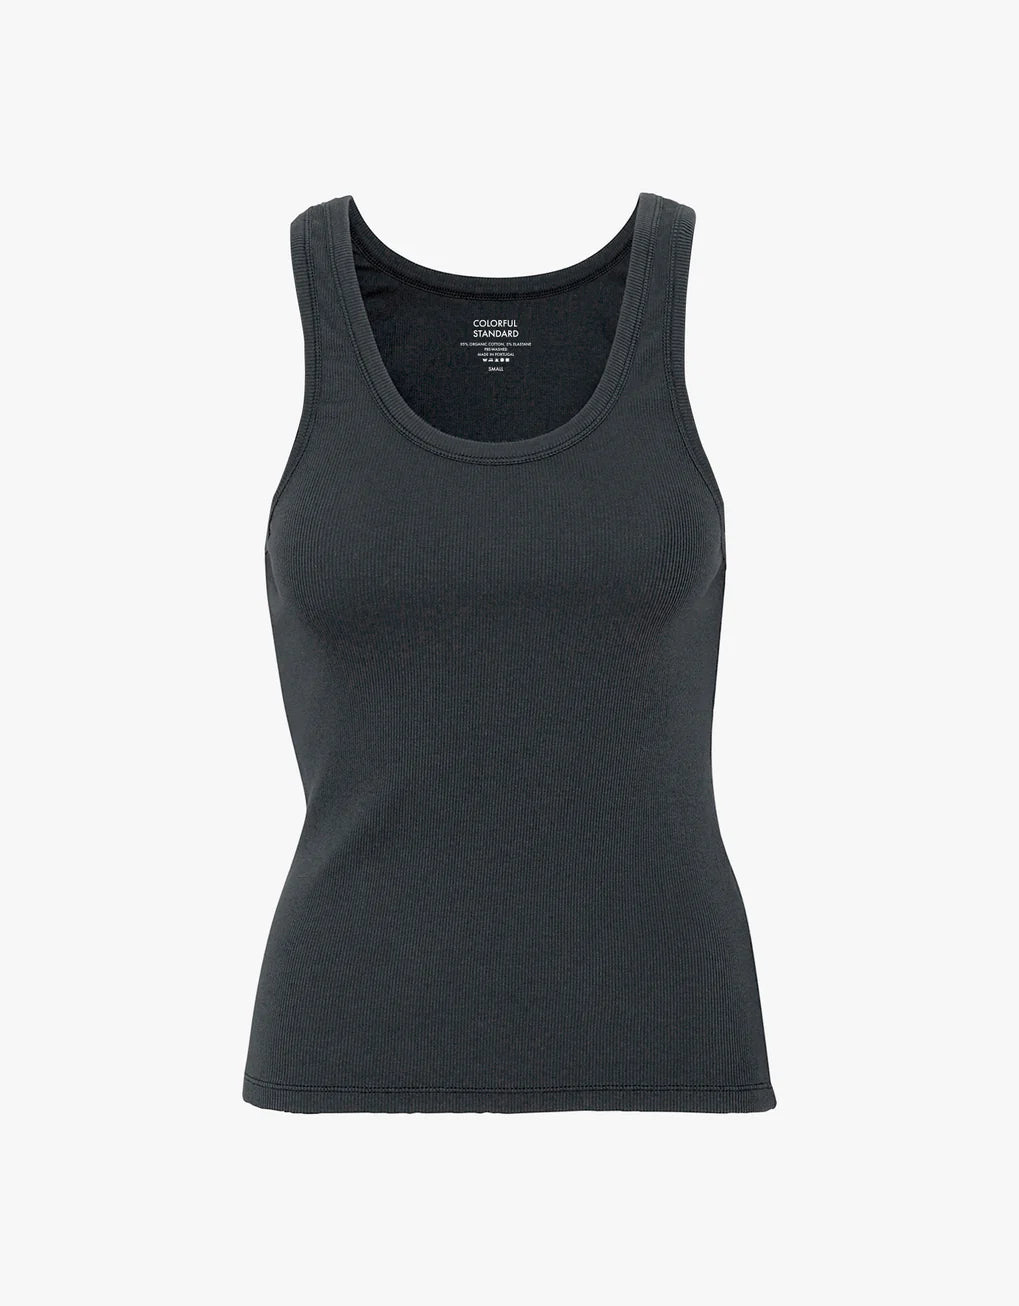 A snug and stretchy Colorful Standard women's black Organic Rib Tank Top on a white background.